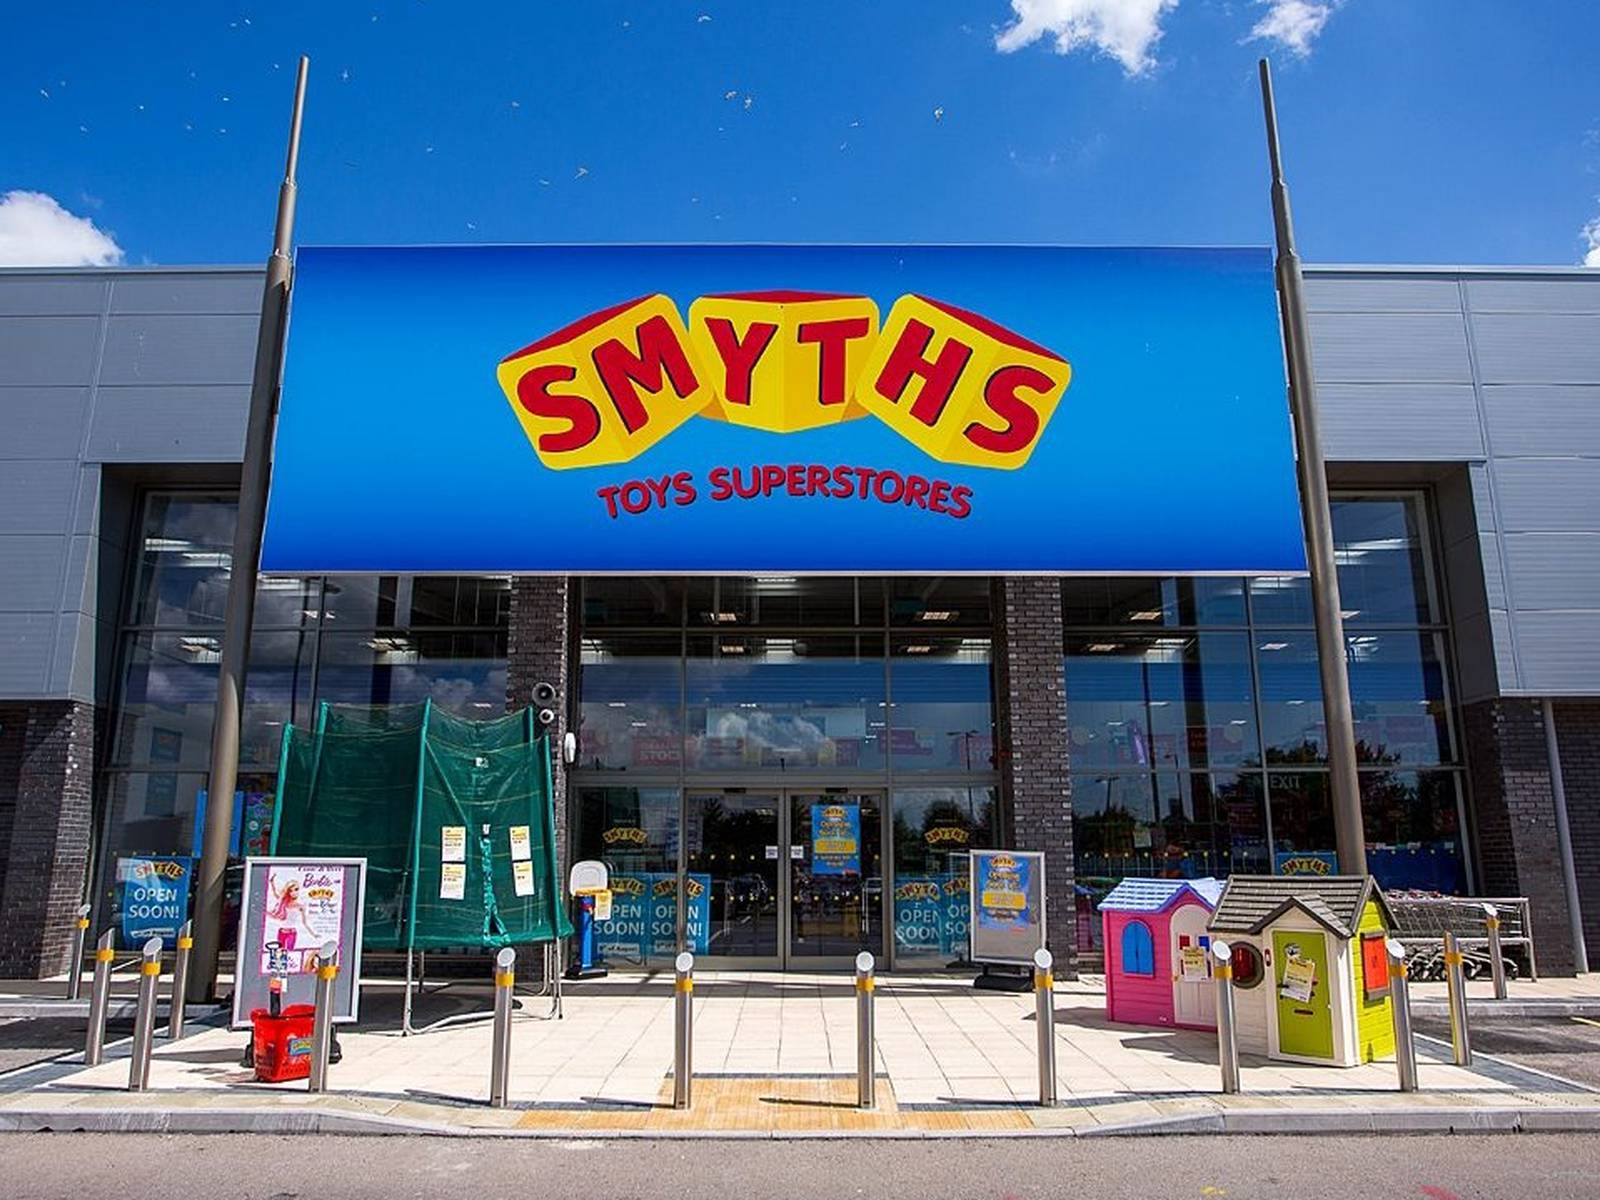 Meet the Smyths, the Mayo family turning toy retailing into child's play –  The Irish Times